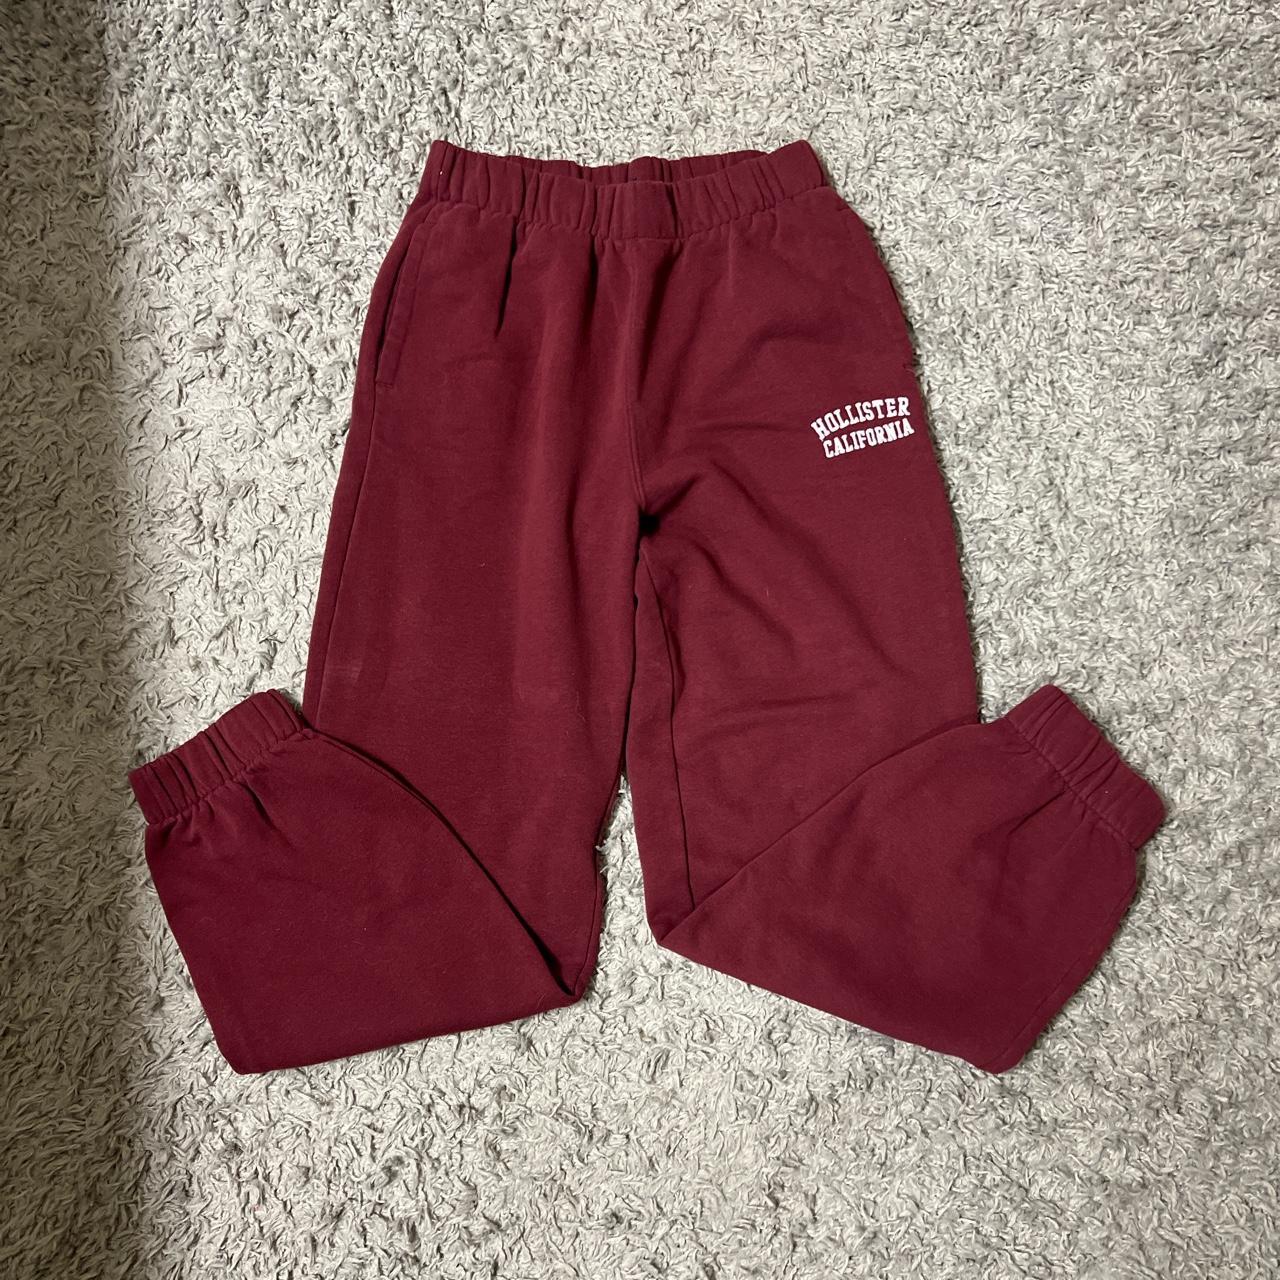 Red Hollister sweatpants